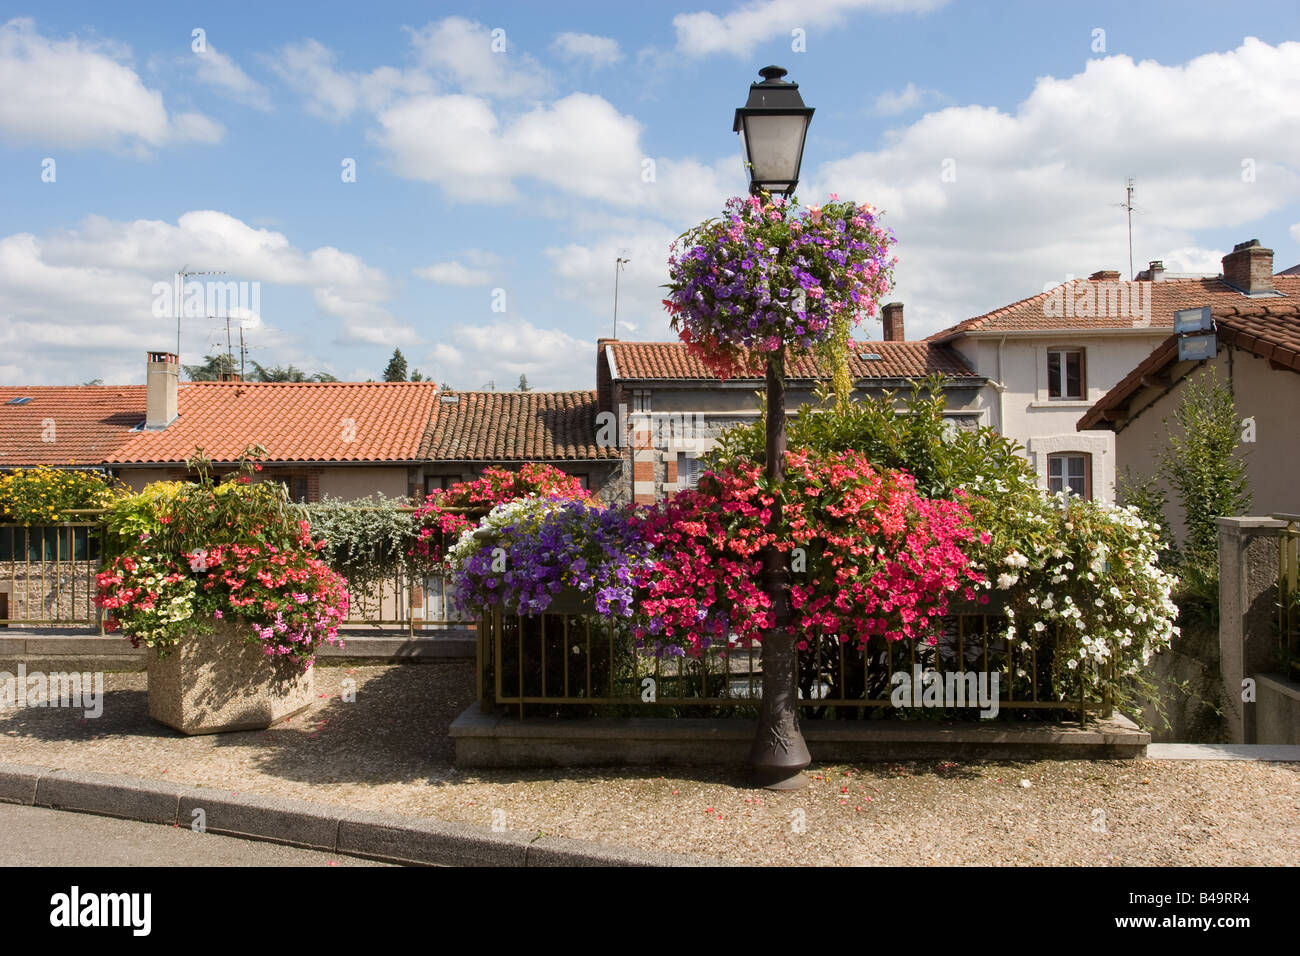 Flower displays in streets of Saint Galmier hilltop town in the Loire region of France Stock Photo